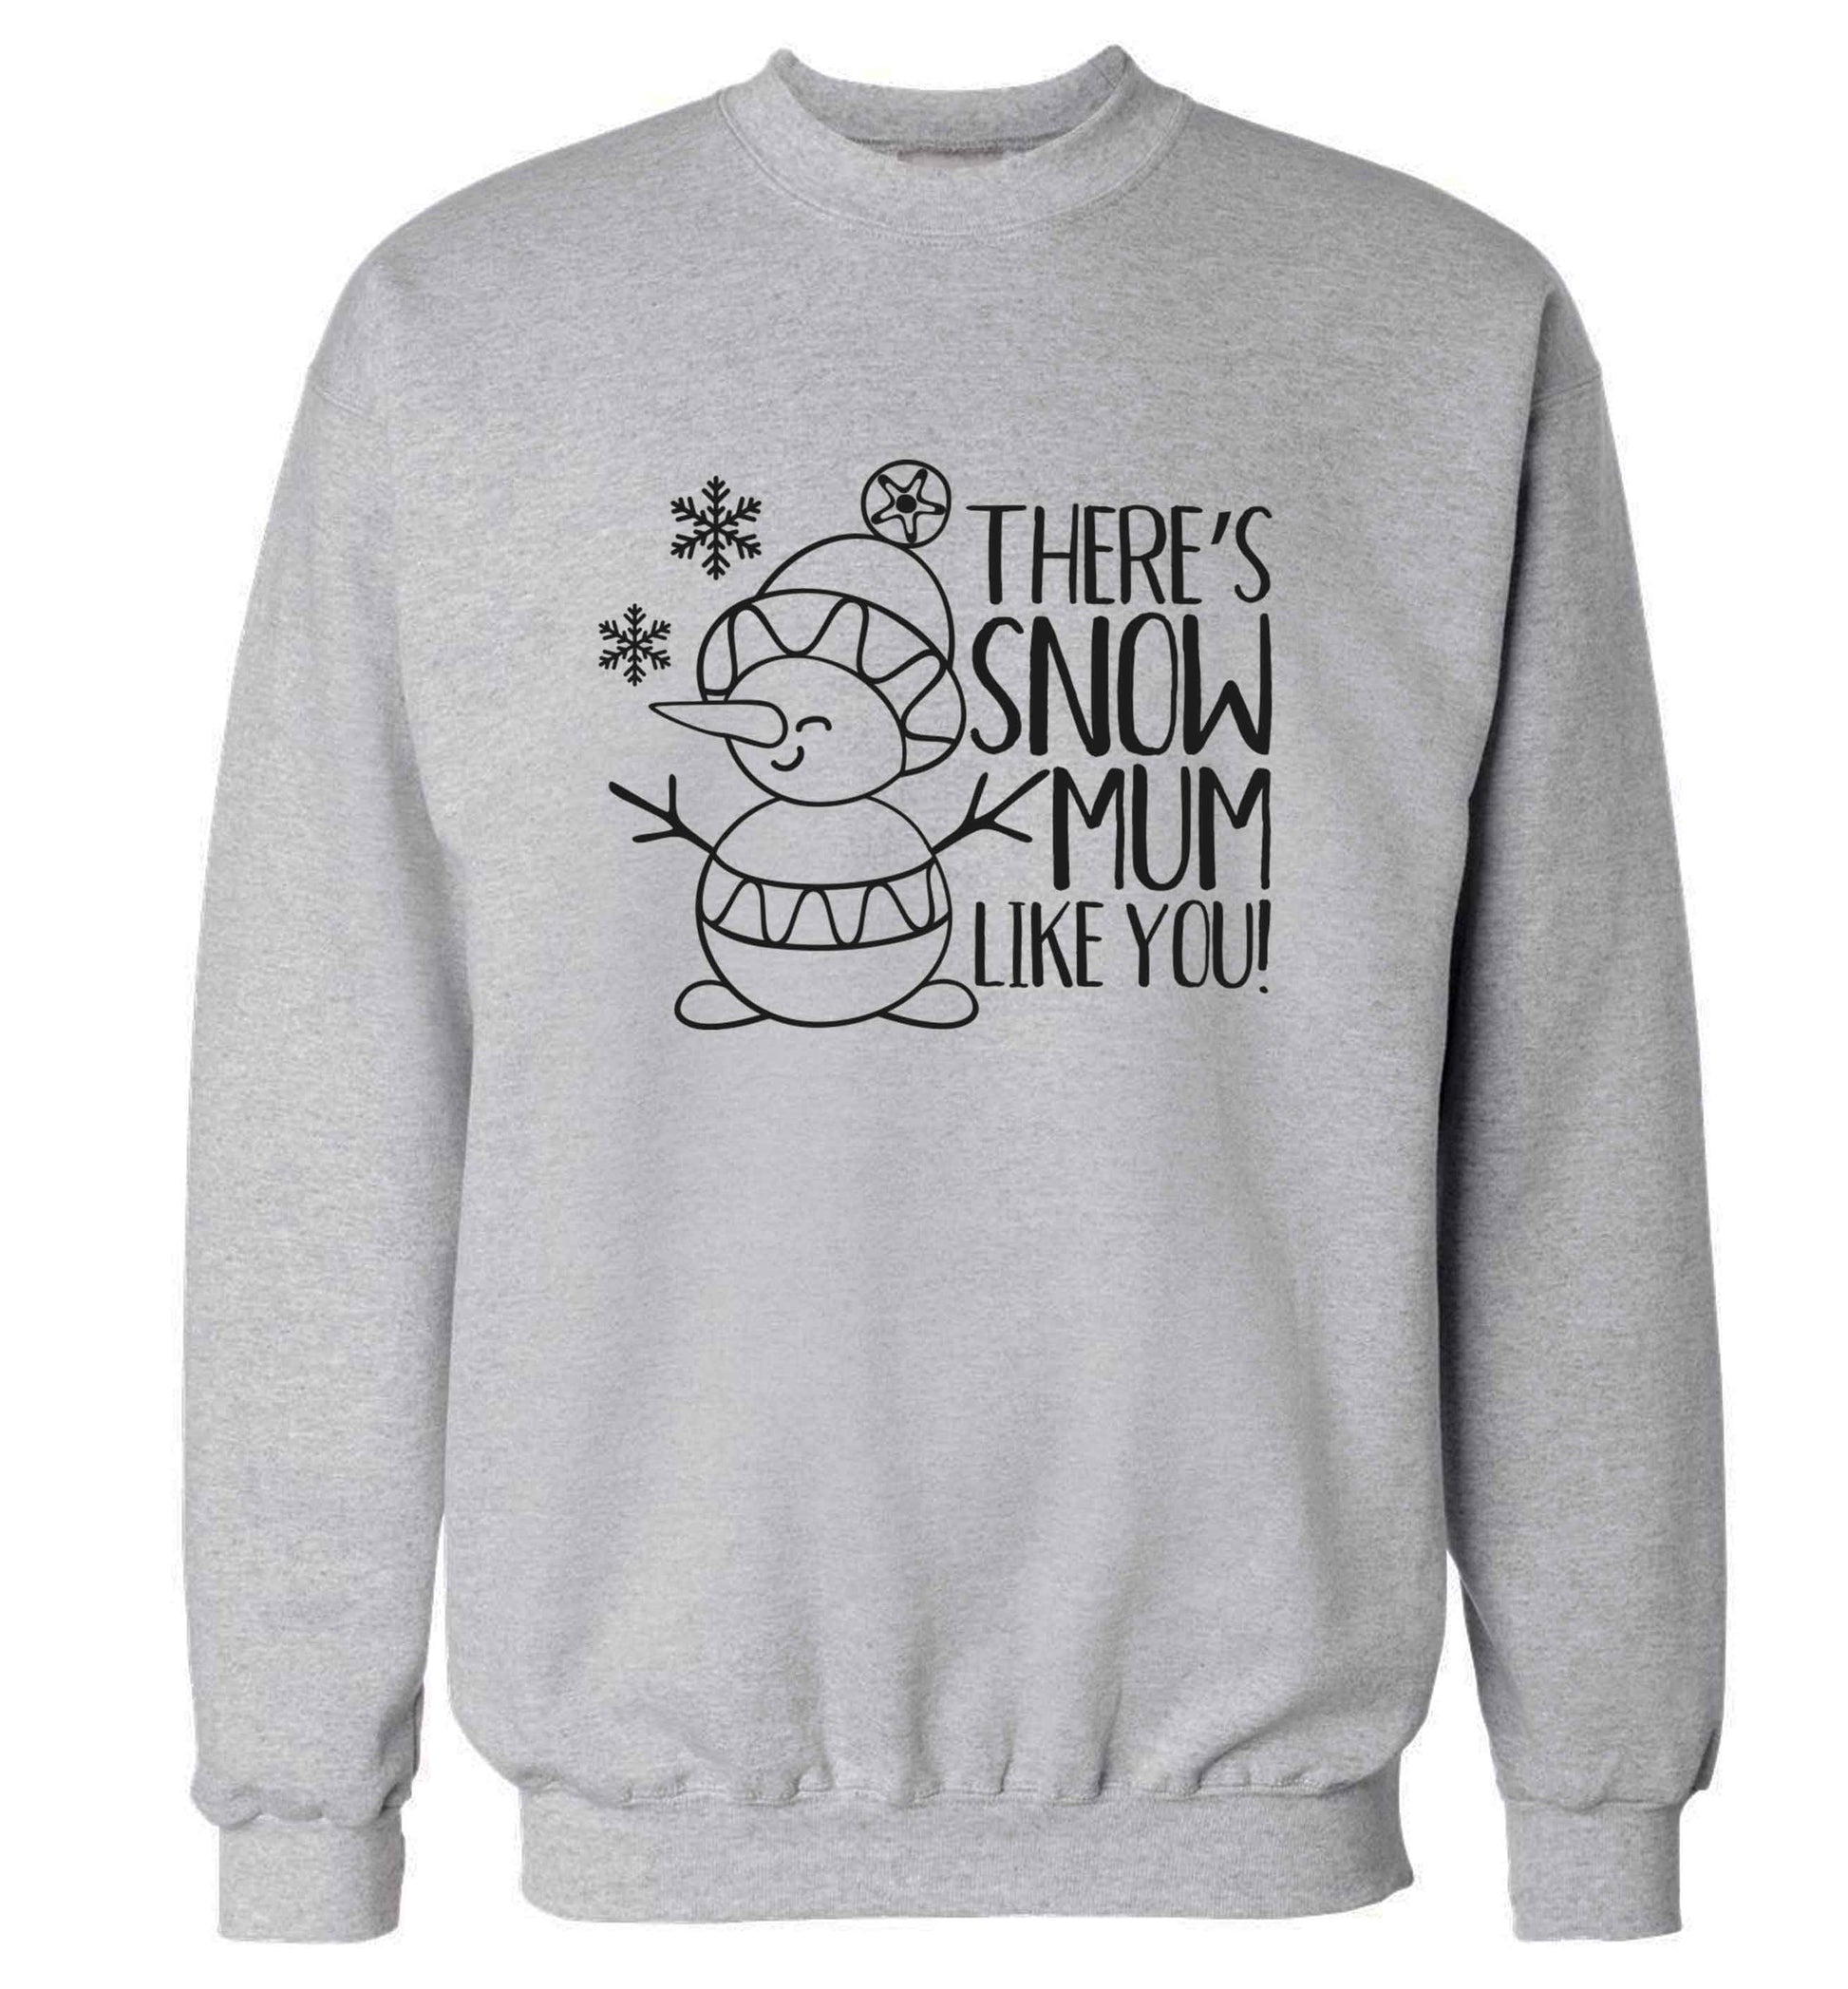 There's snow mum like you adult's unisex grey sweater 2XL